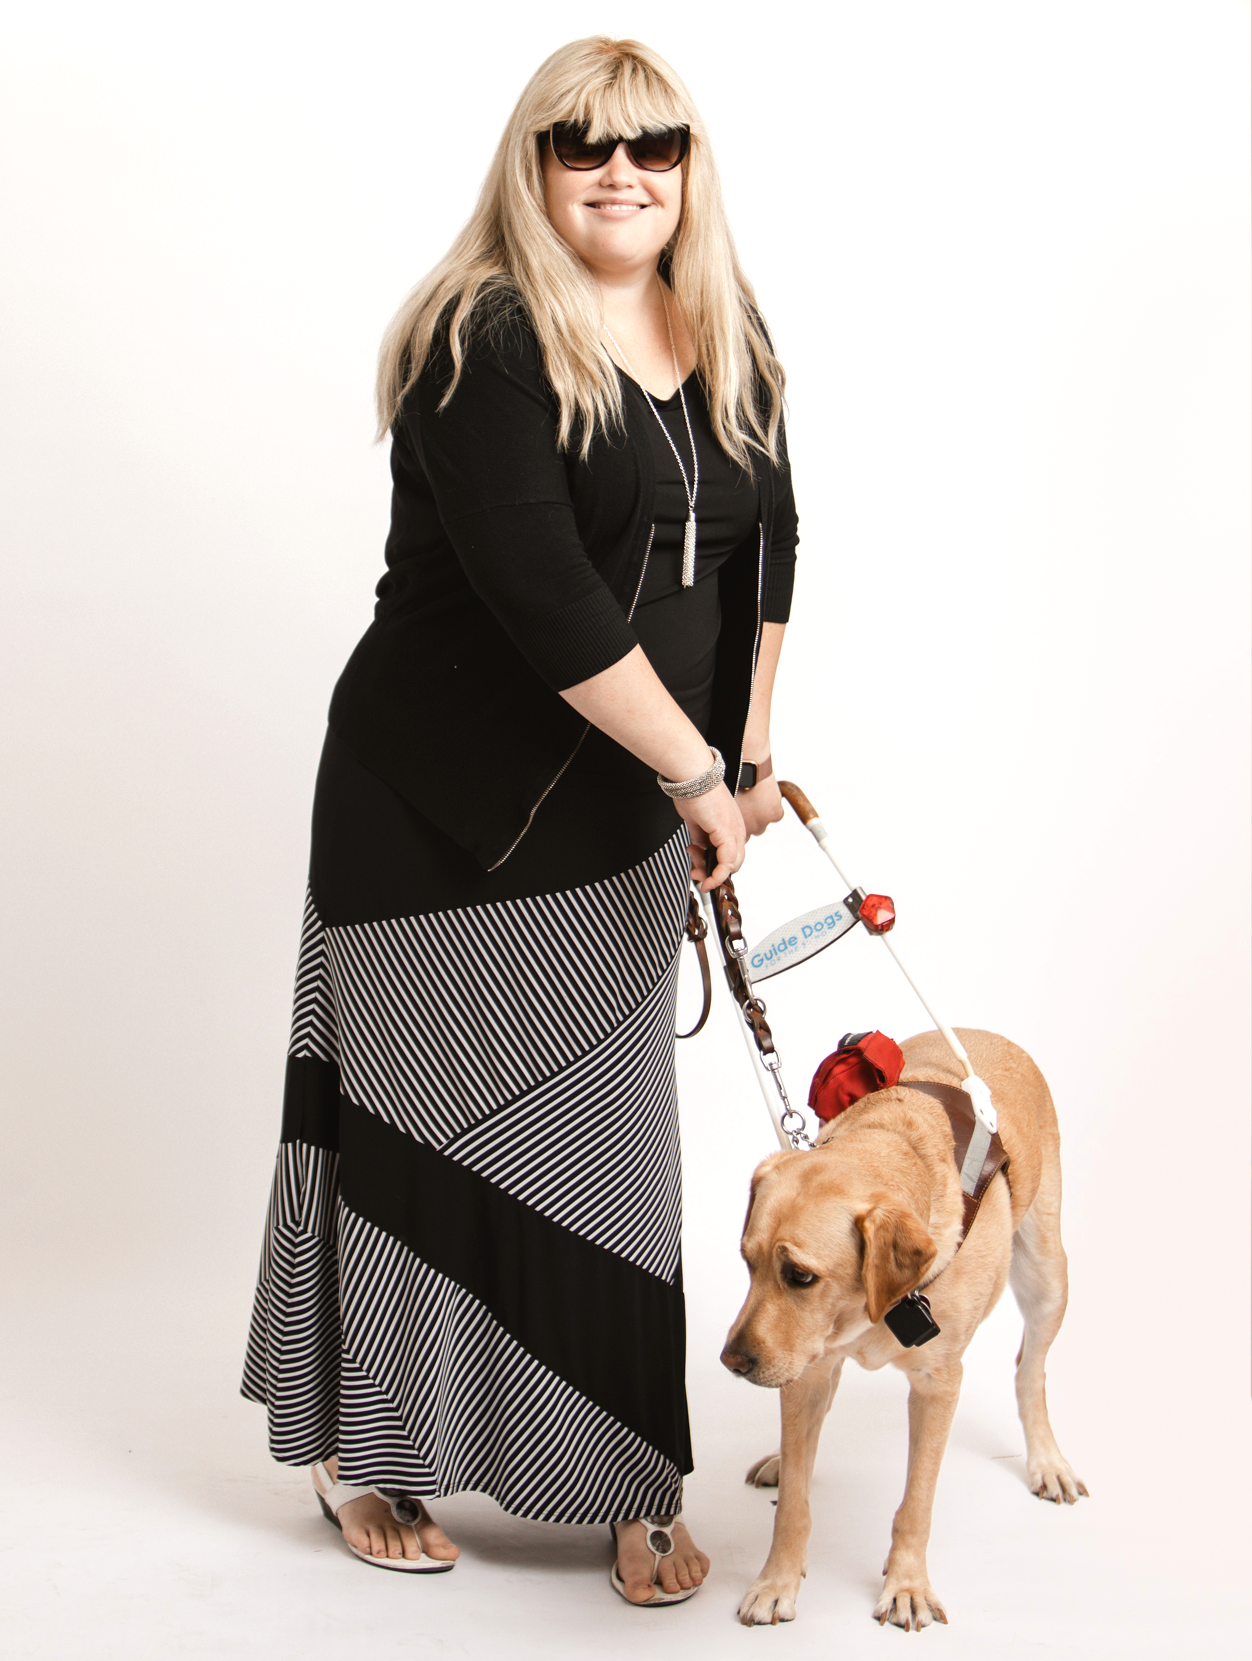 Image of Alisa with her guide dog.